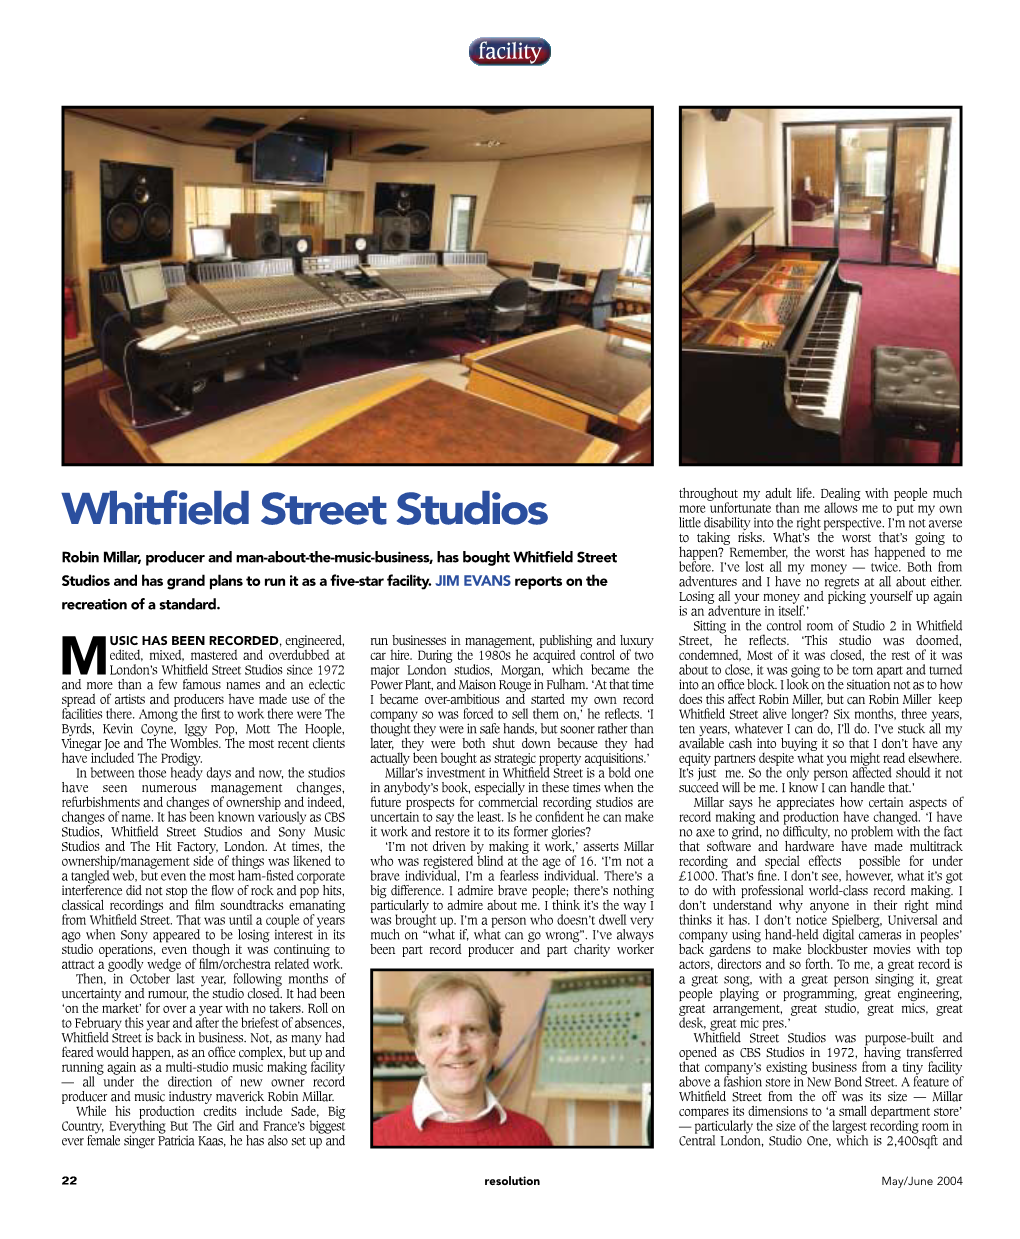 WHITFIELD STREET STUDIOS, LONDON: Tel: +44 207 636 3434 So We Have a Plan for a Major Six ﬁgure Reﬁt of That from the G Plus